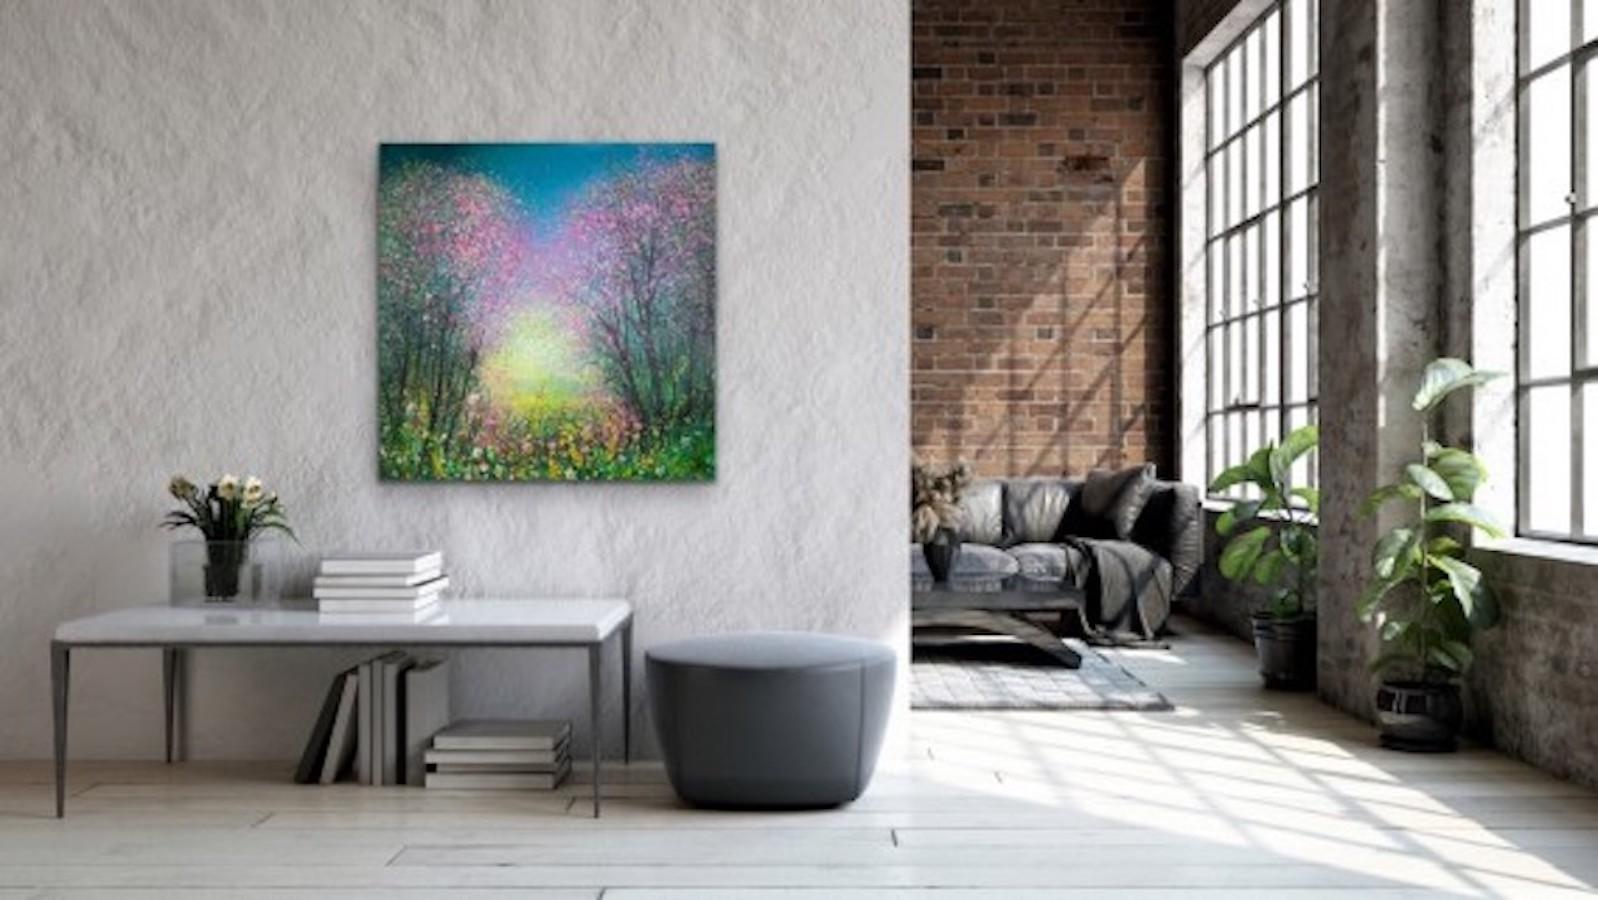 Cherry Blossom and Spring Flora, Original painting, landscape, colourful art - Gray Landscape Painting by Jan Rogers